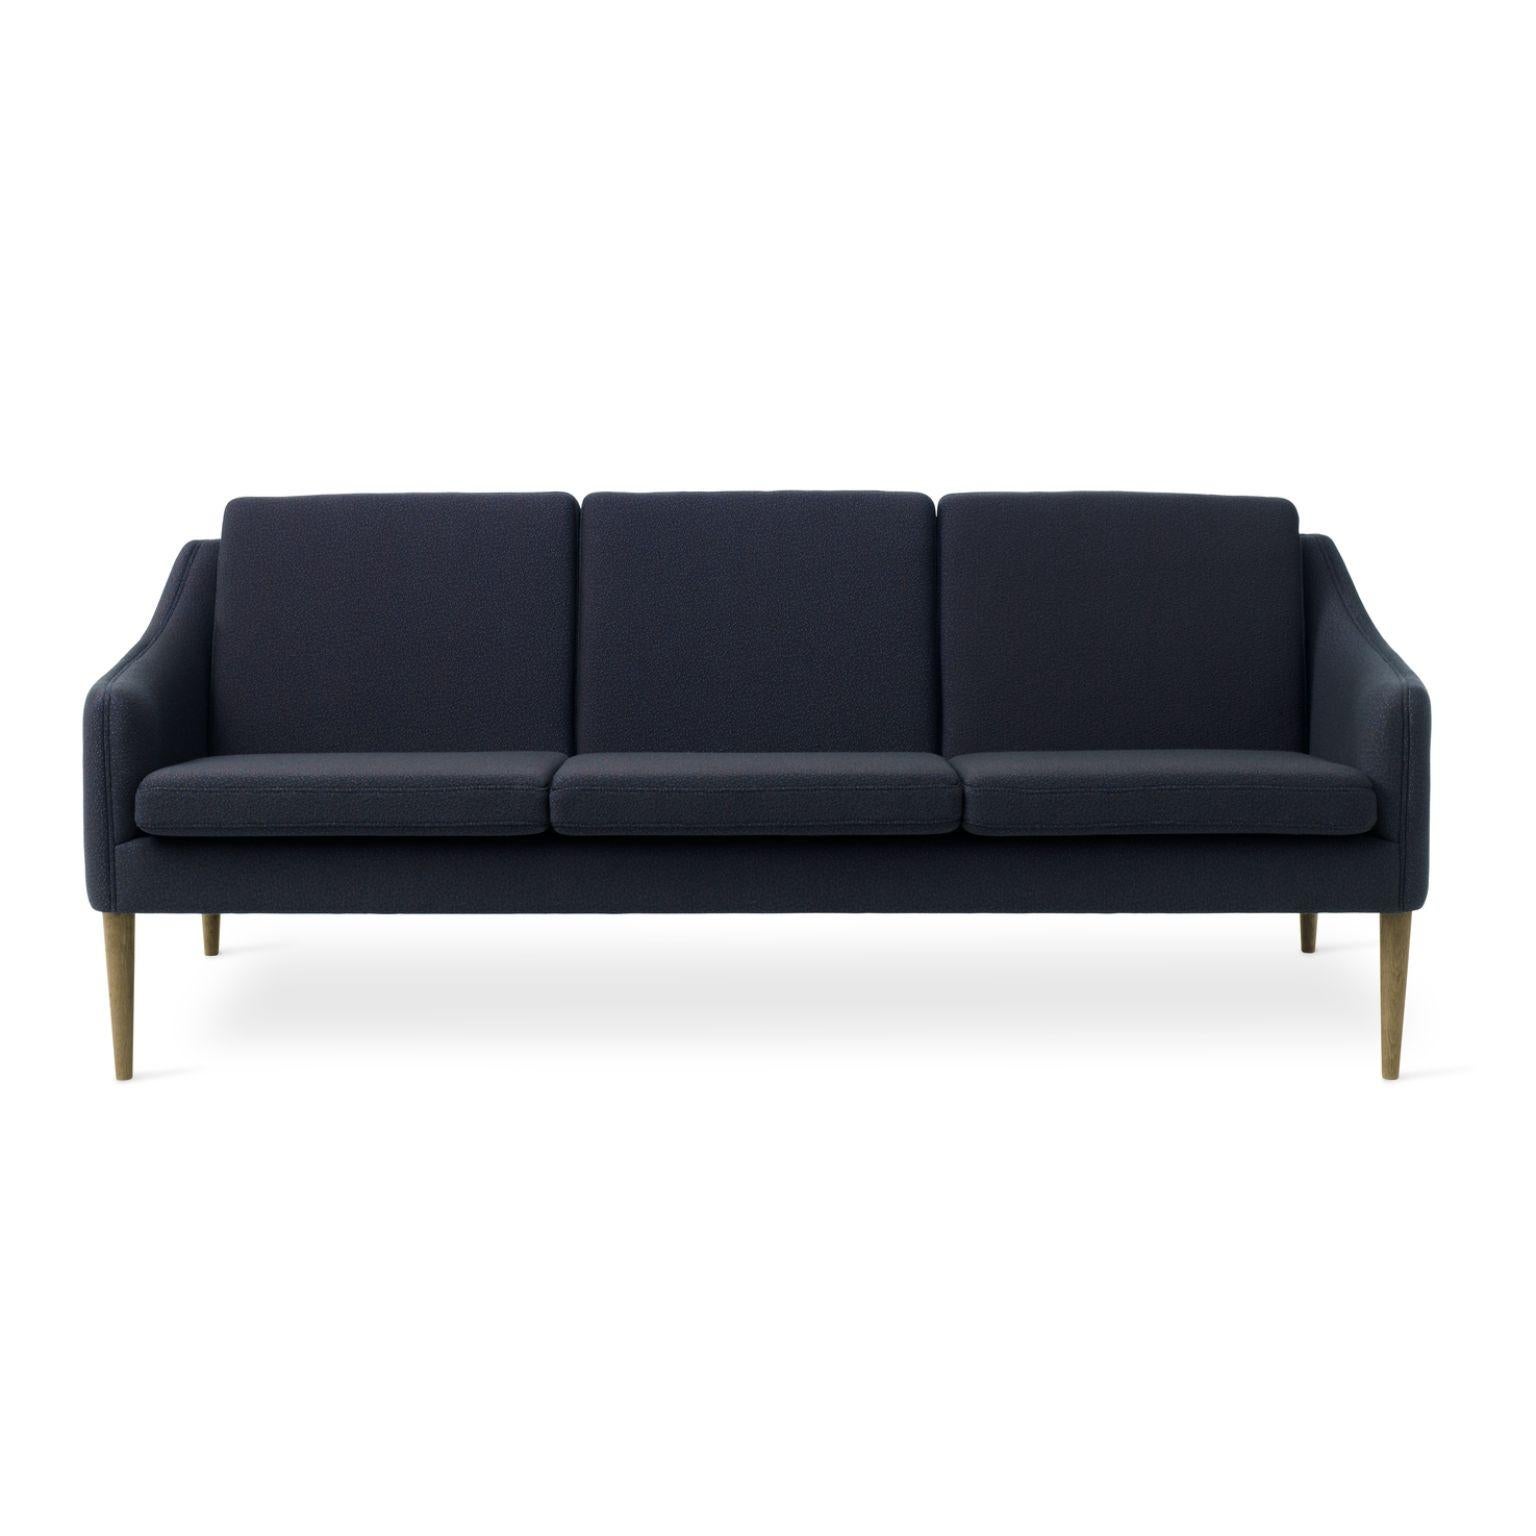 Mr Olsen 3 seater Oak Sprinkles Midnight Blue by Warm Nordic
Dimensions: D201 x W79 x H 78/46 cm
Material: Textile upholstery, Foam, Spring system, Solid oiled oak legs, Solid smoked oak legs
Weight: 50 kg
Also available in different colours and